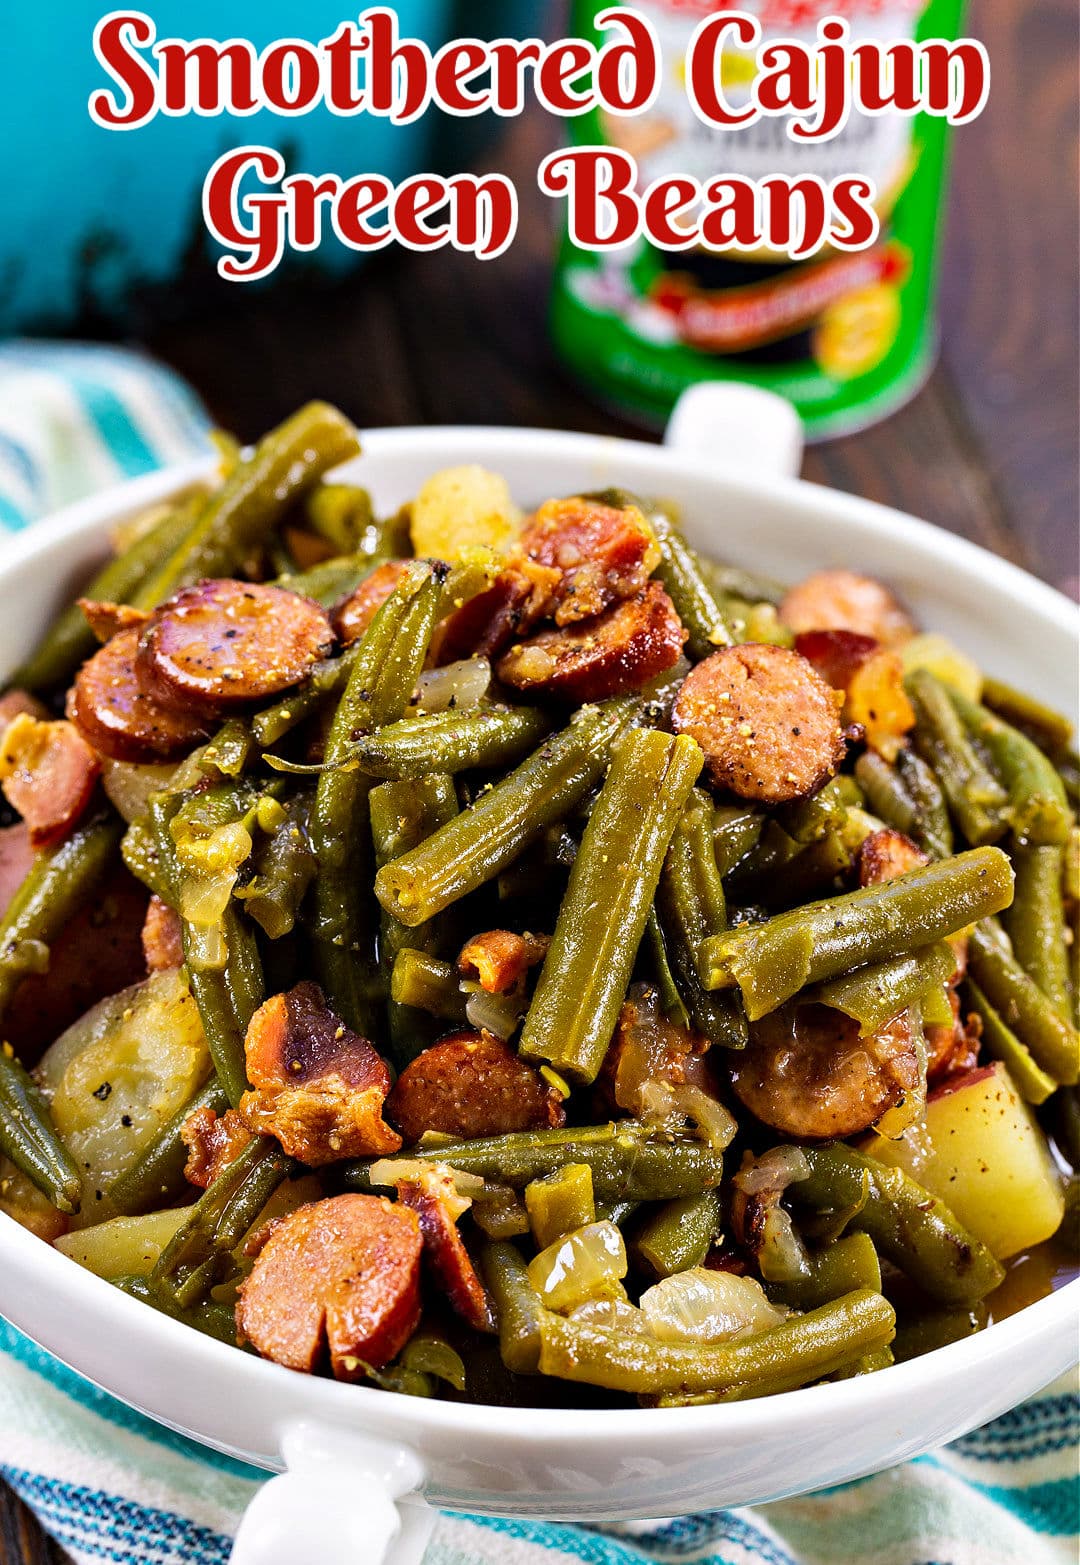 Smothered Cajun Green Beans in a serving dish.